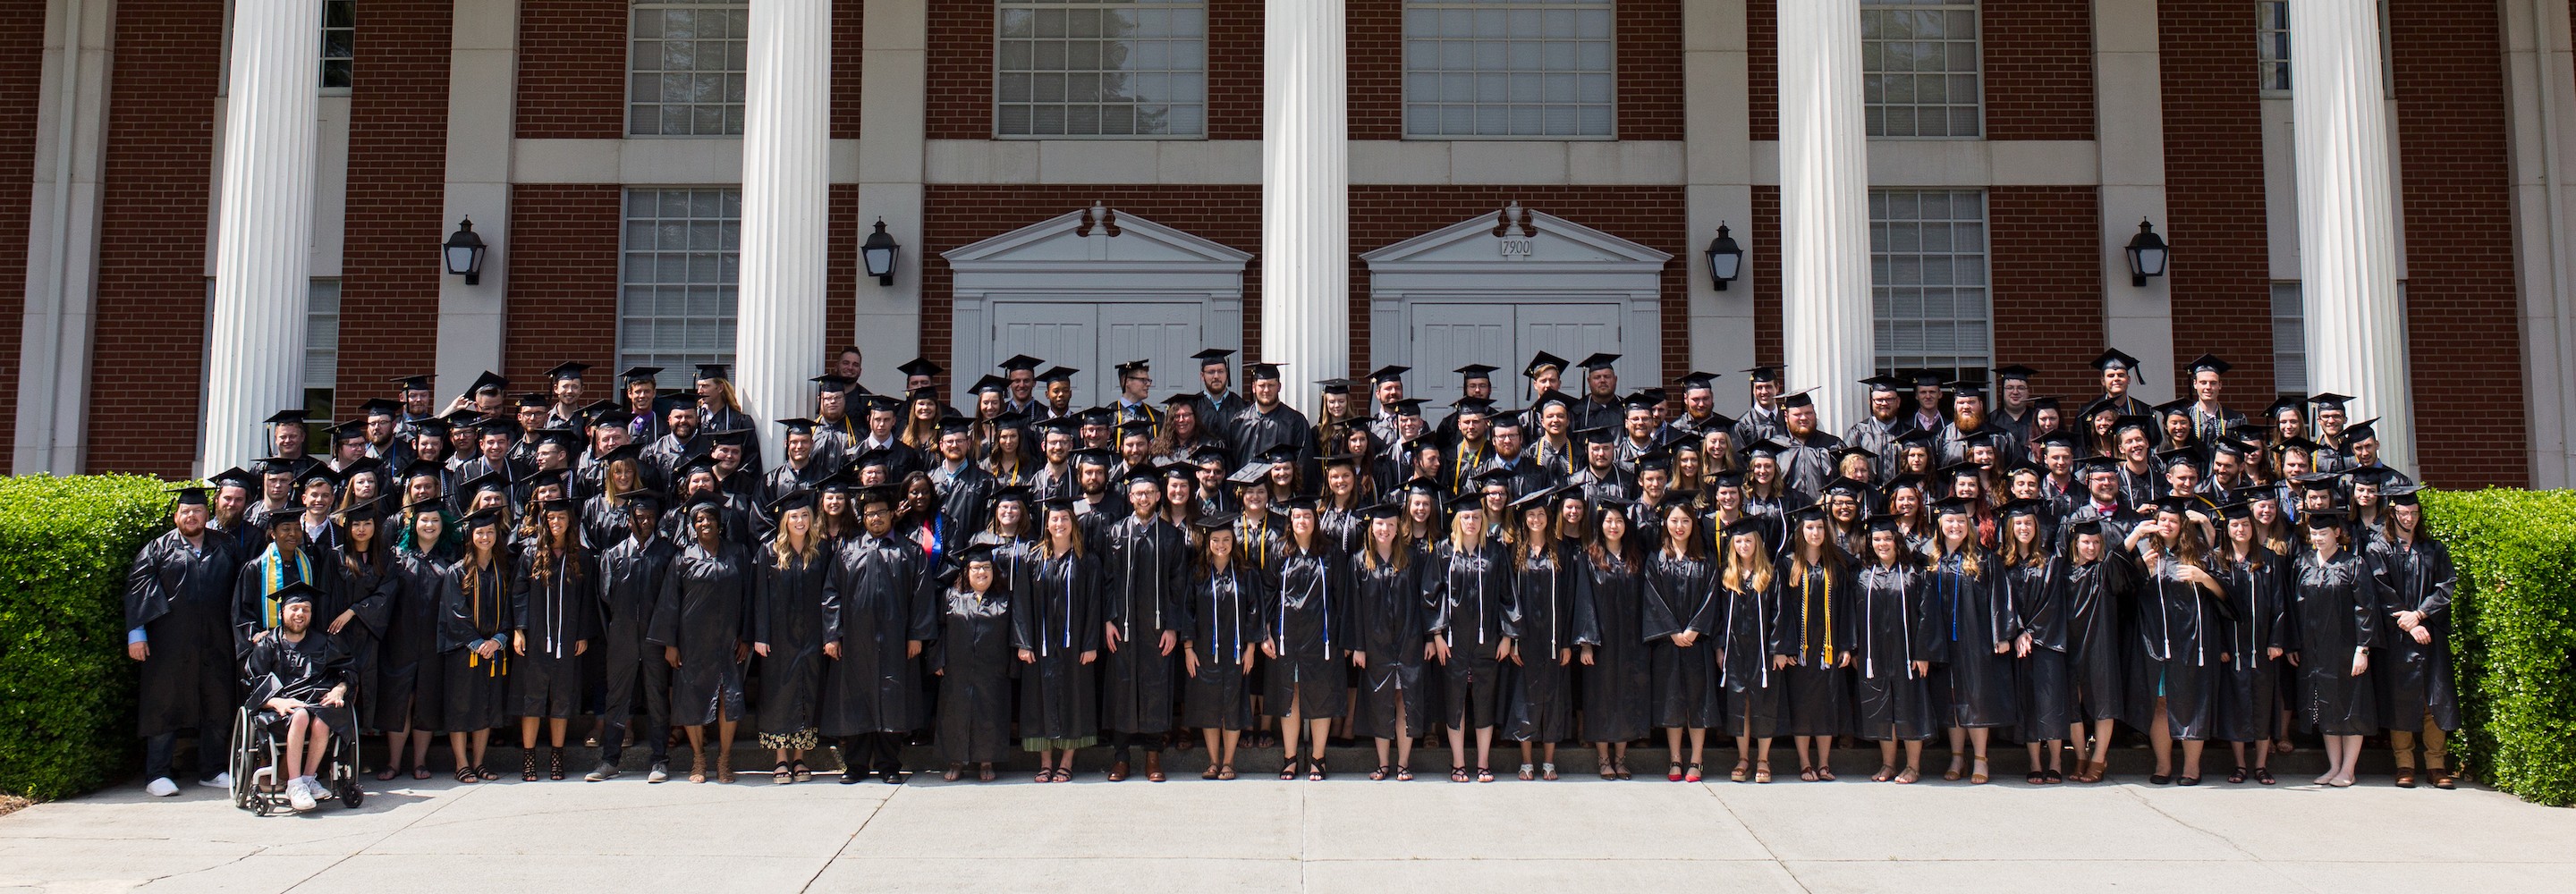 2019 graduating class before commencement